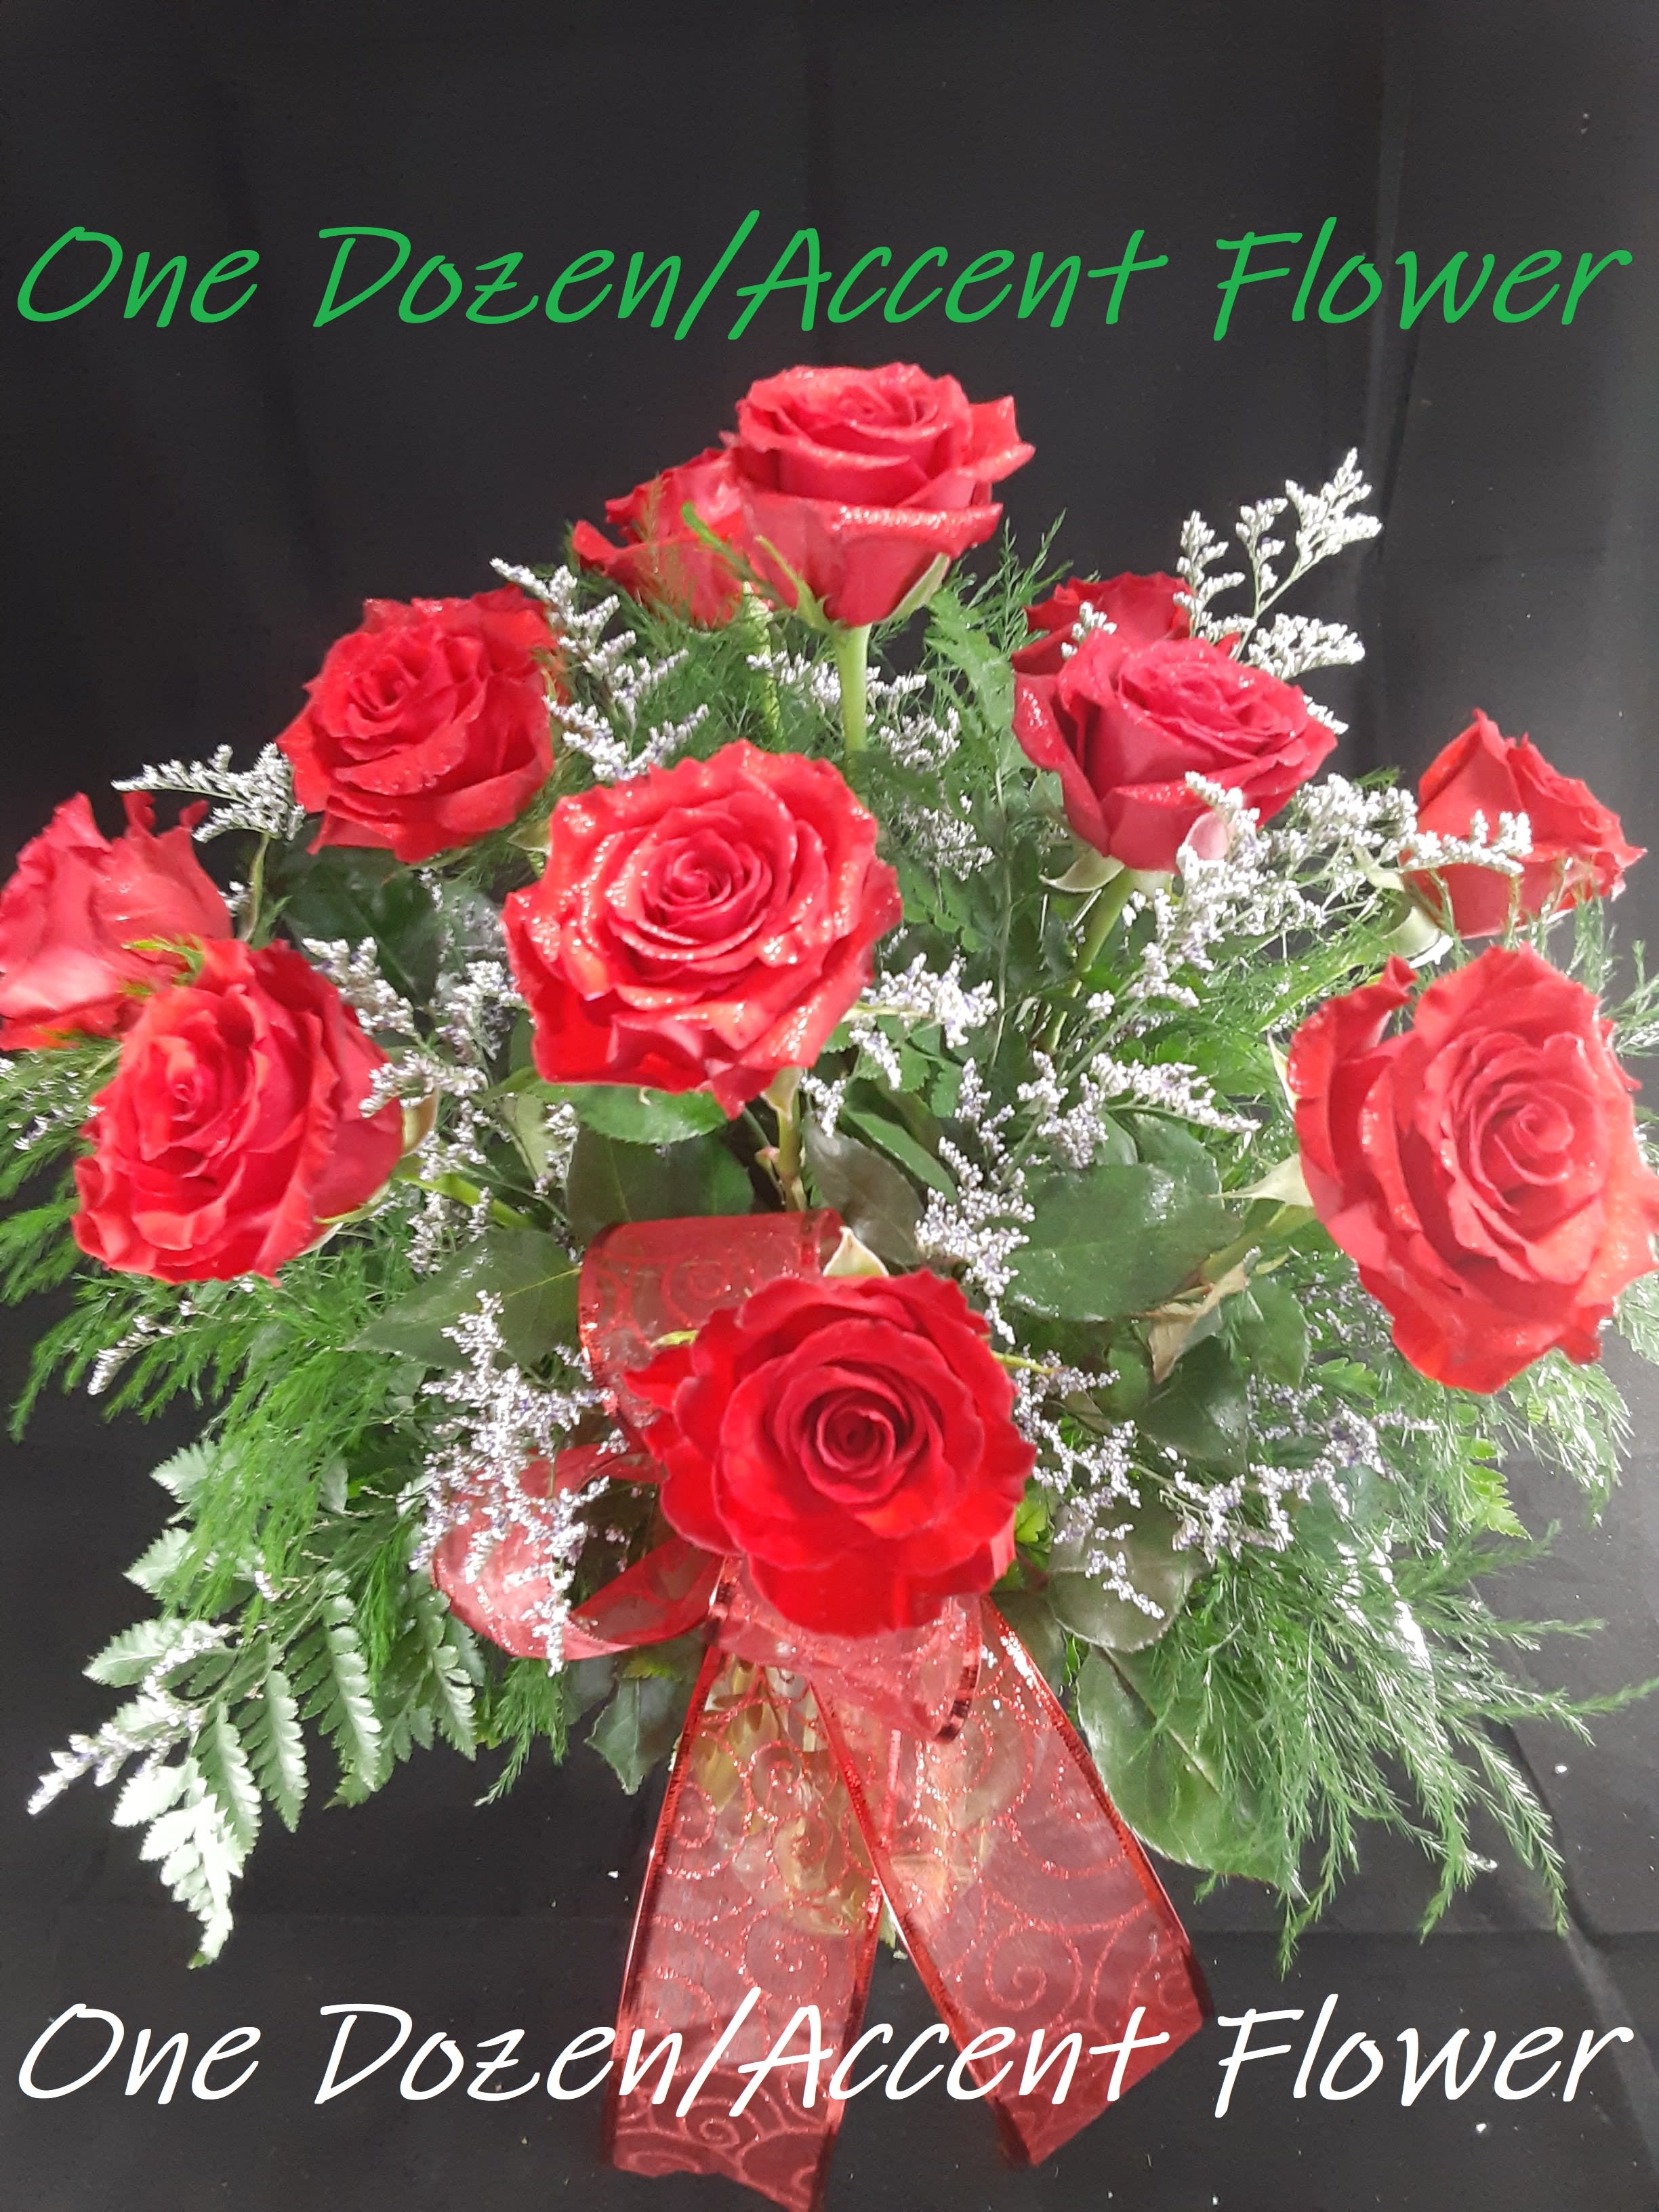 Premium Red Roses - Red roses are always a timeless choice, symbolizing romance and passion. Nature's beauty artistically crafted, our rose arrangements feature long-stemmed roses, expertly curated to order, with an accent flower chosen by one of our designers. Delivered to your loved one in a clear glass vase. 